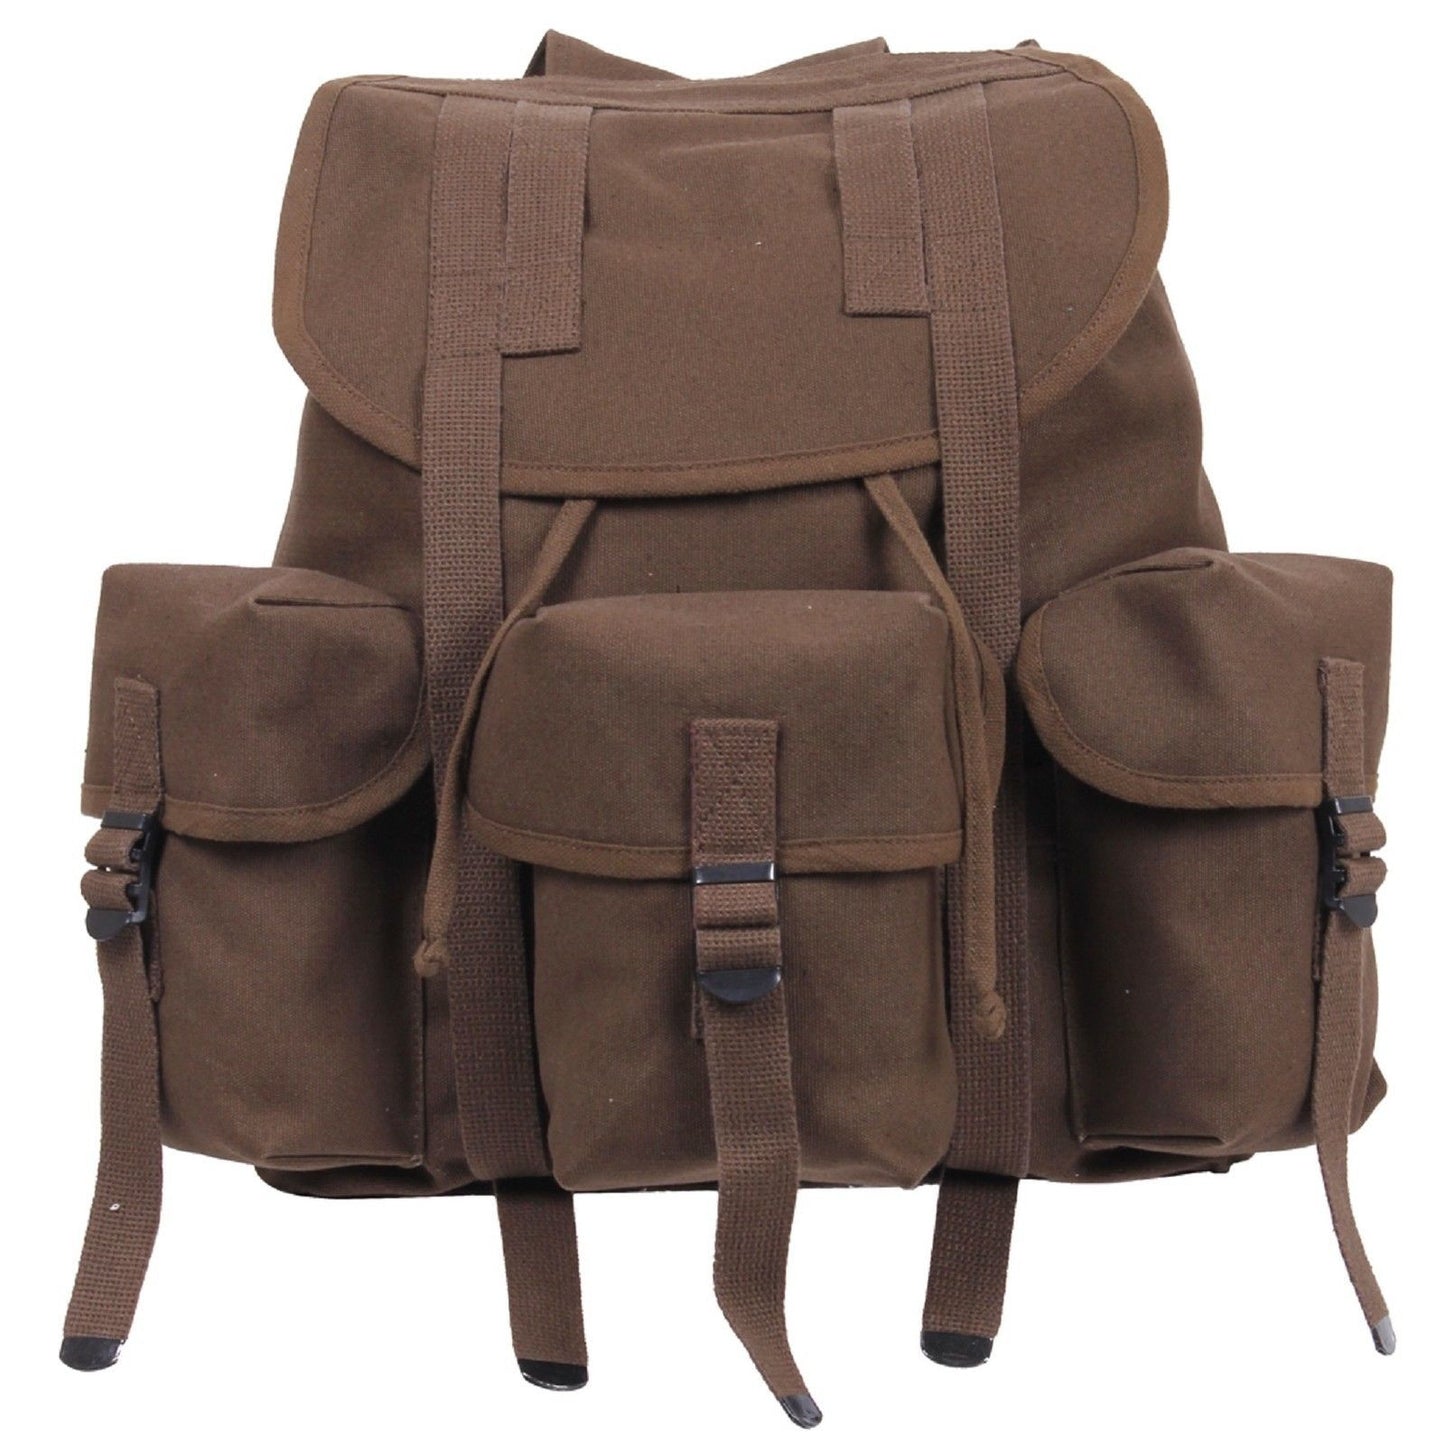 Earth Brown Mini ALICE Pack Backpack - 16" Heavyweight Canvas Bag